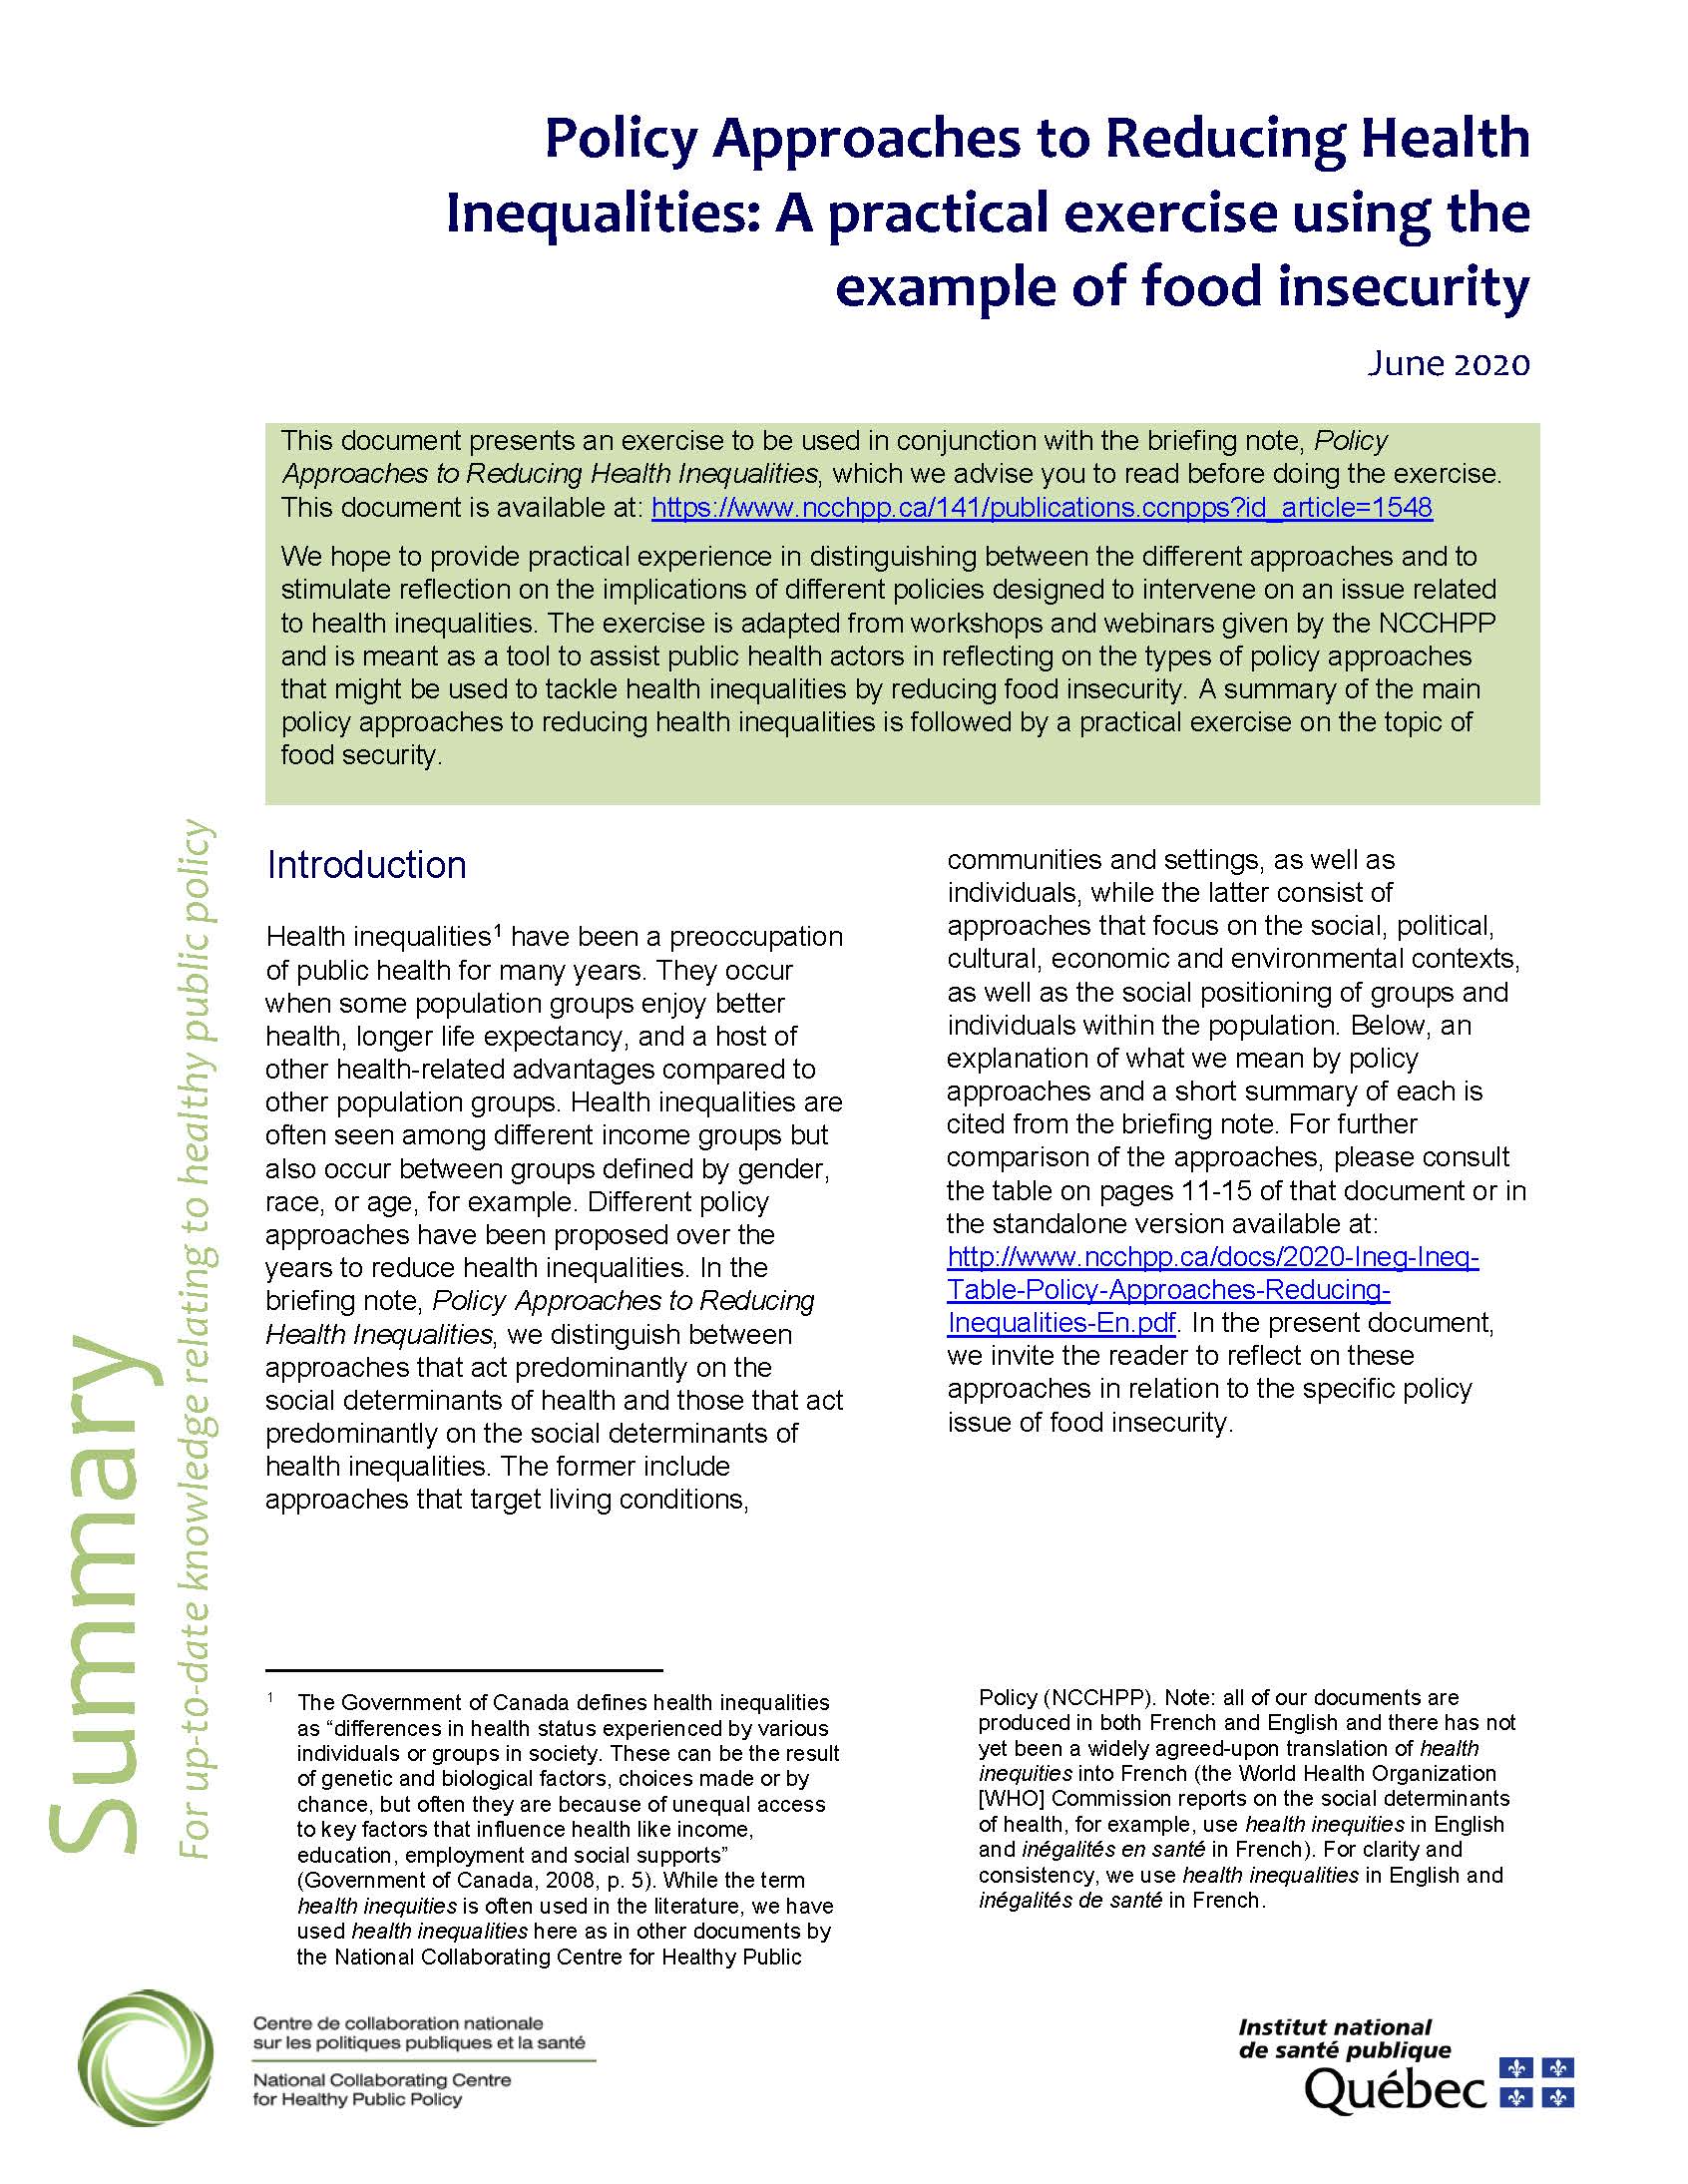 Policy Approaches to Reducing Health Inequalities: A practical exercise using the example of food insecurity